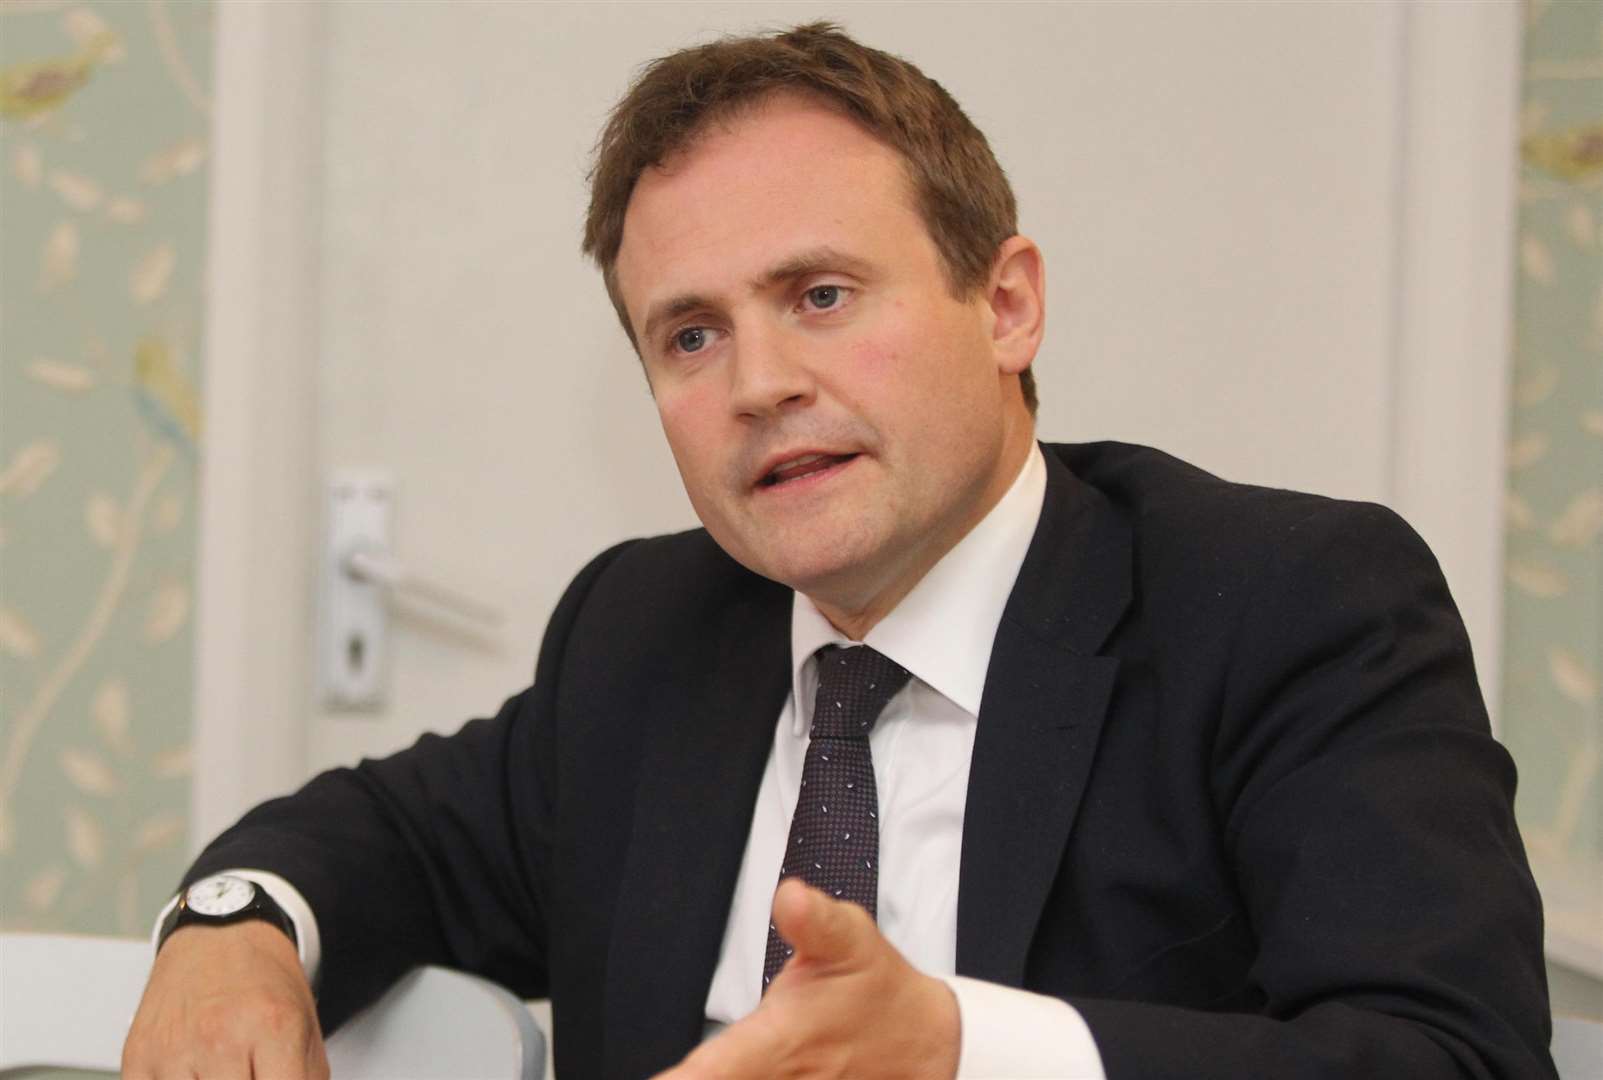 MP Tom Tugendhat says the crossing can't be built without more investment